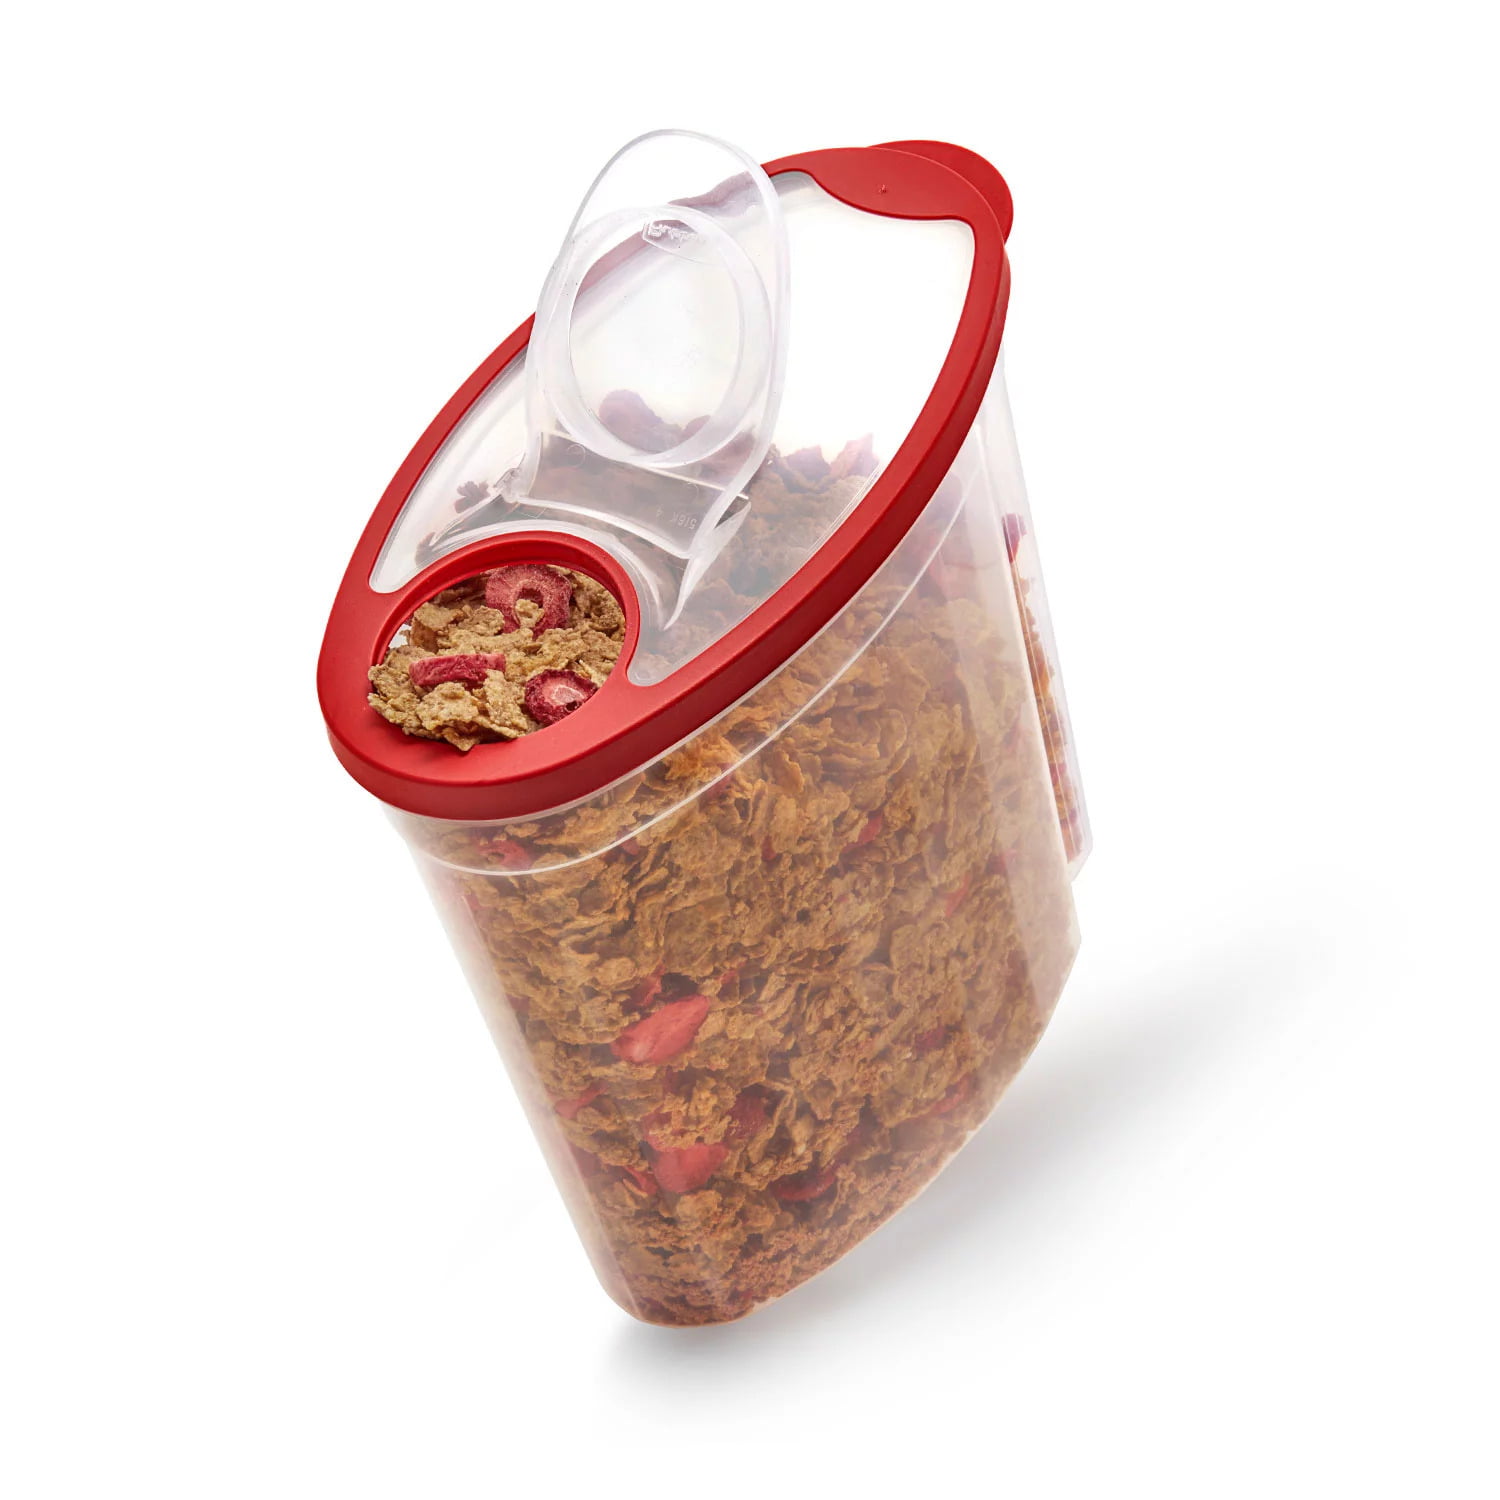 Rubbermaid Cereal Keeper, 3 pk.